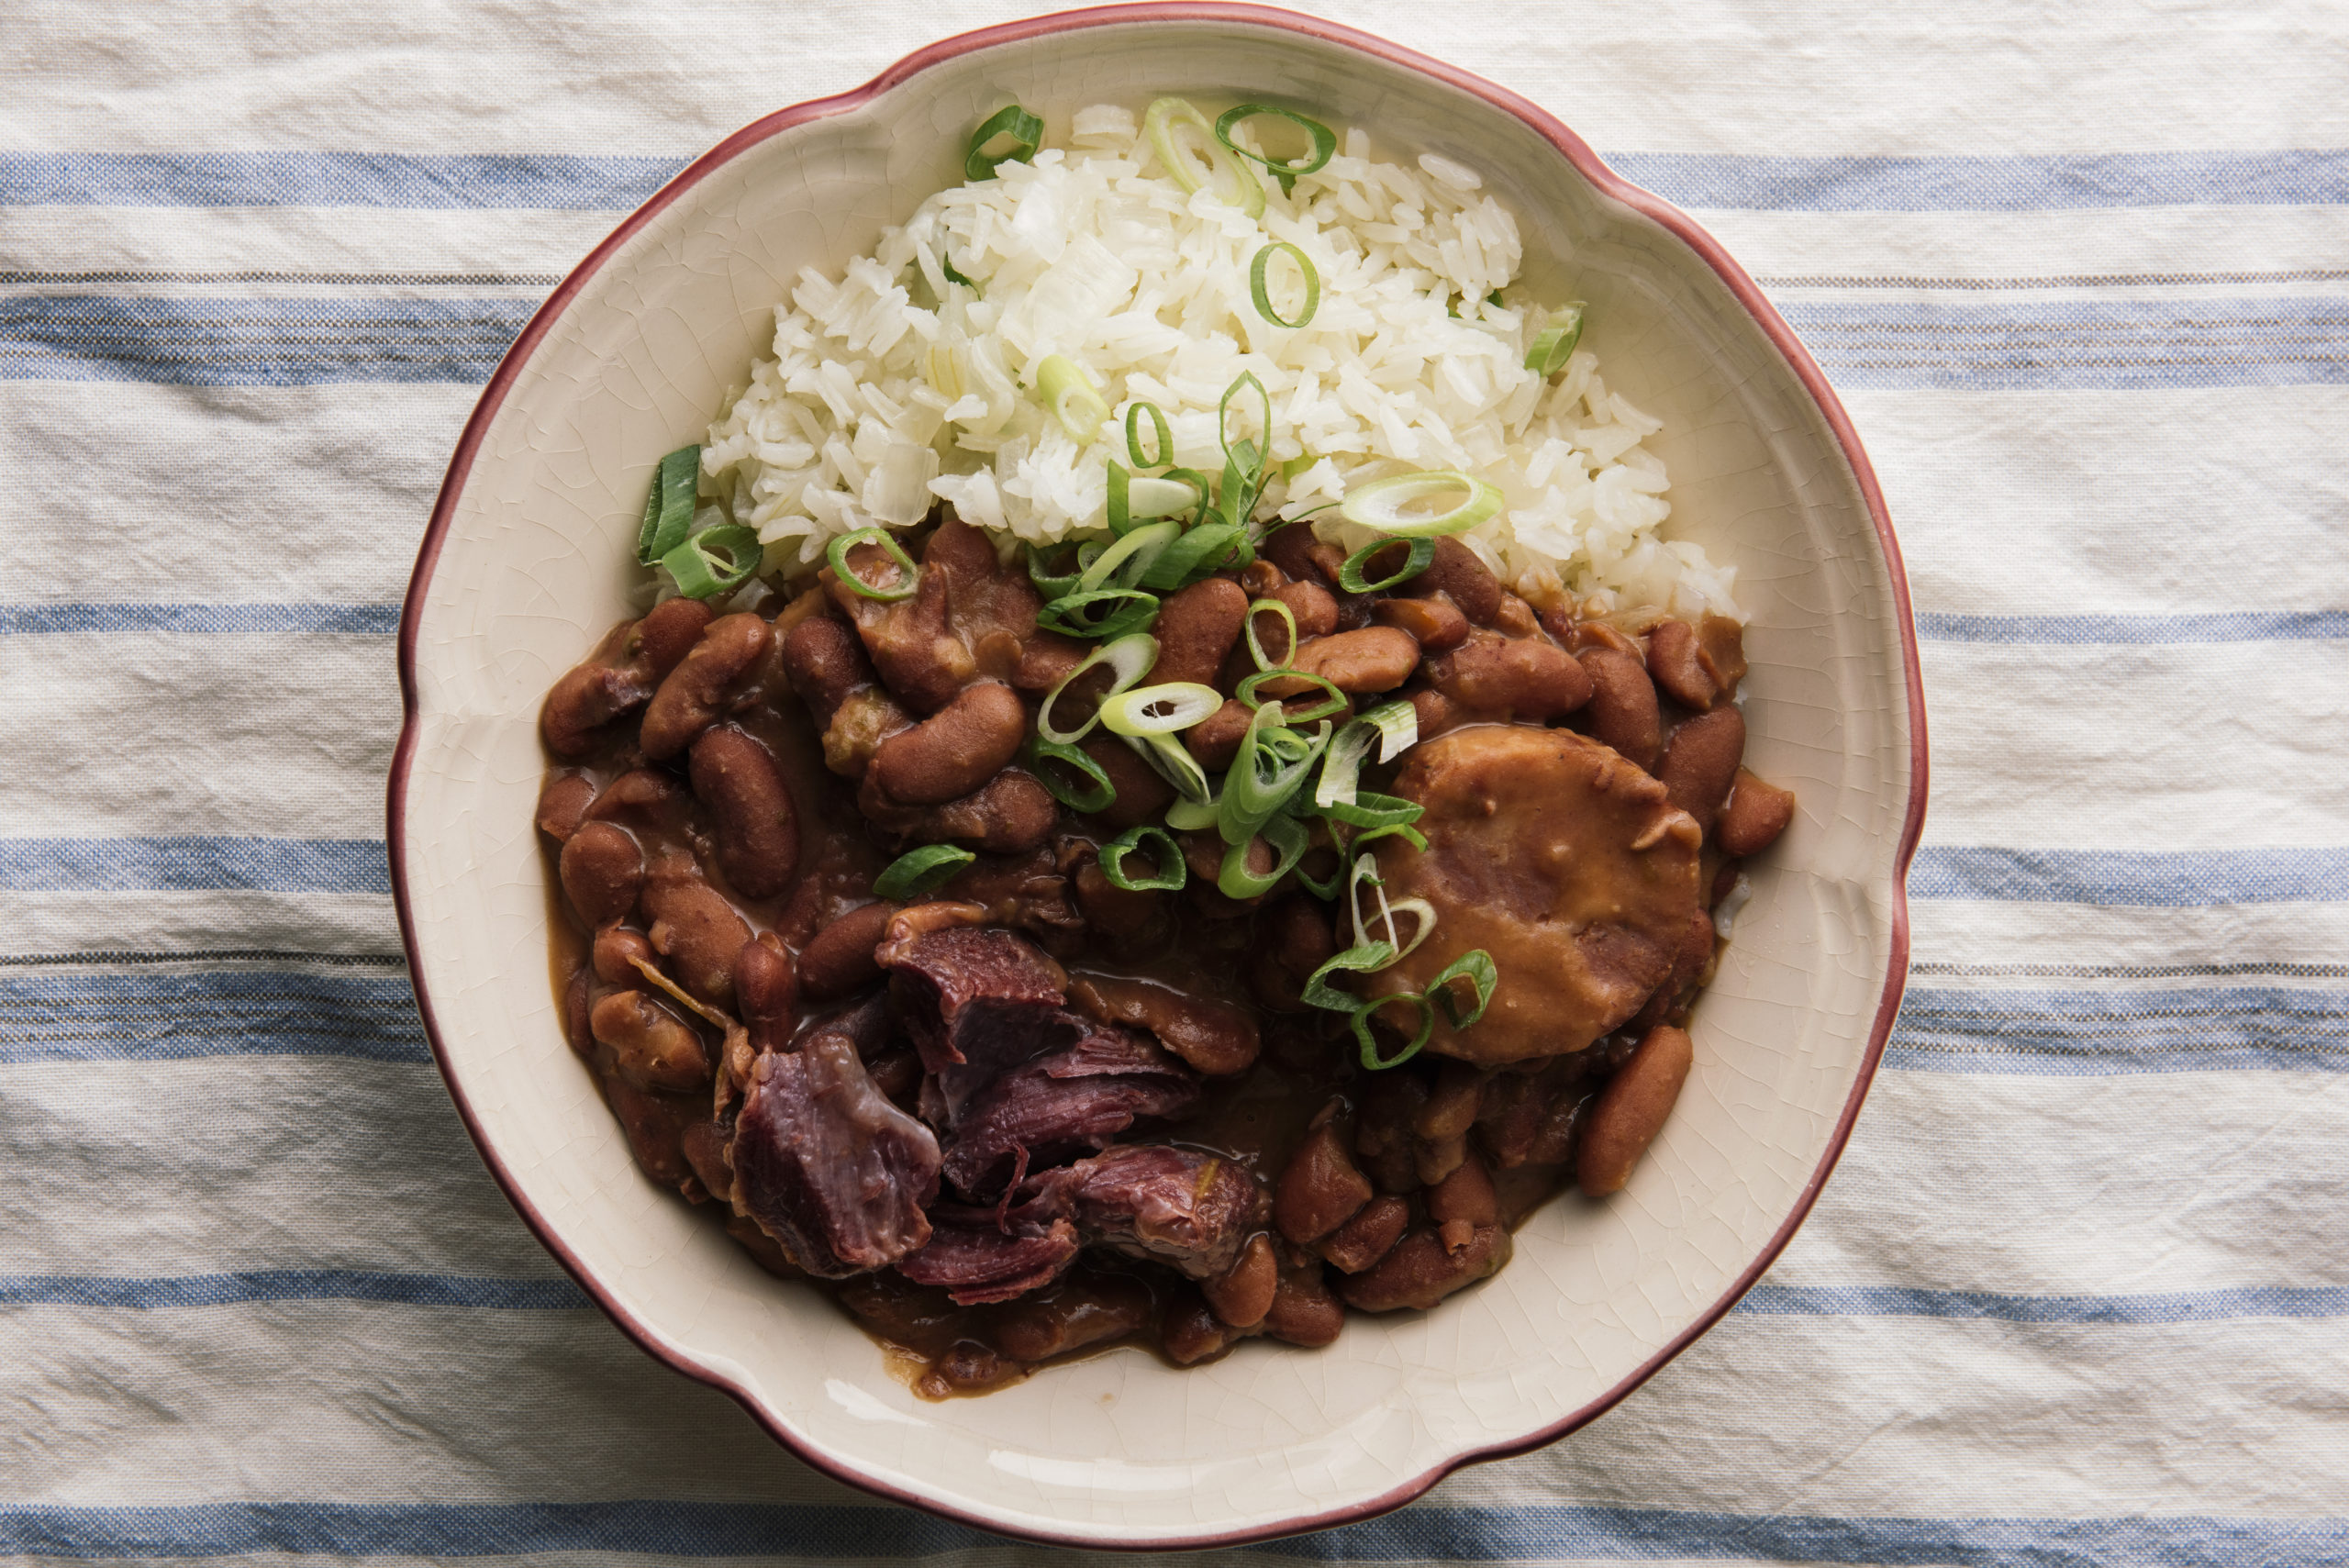 https://www.offbeat.com/wp-content/uploads/2021/01/Feb-21-Emilys-Famous-Red-Beans-and-Rice-by-Rush-Jagoe-scaled.jpg